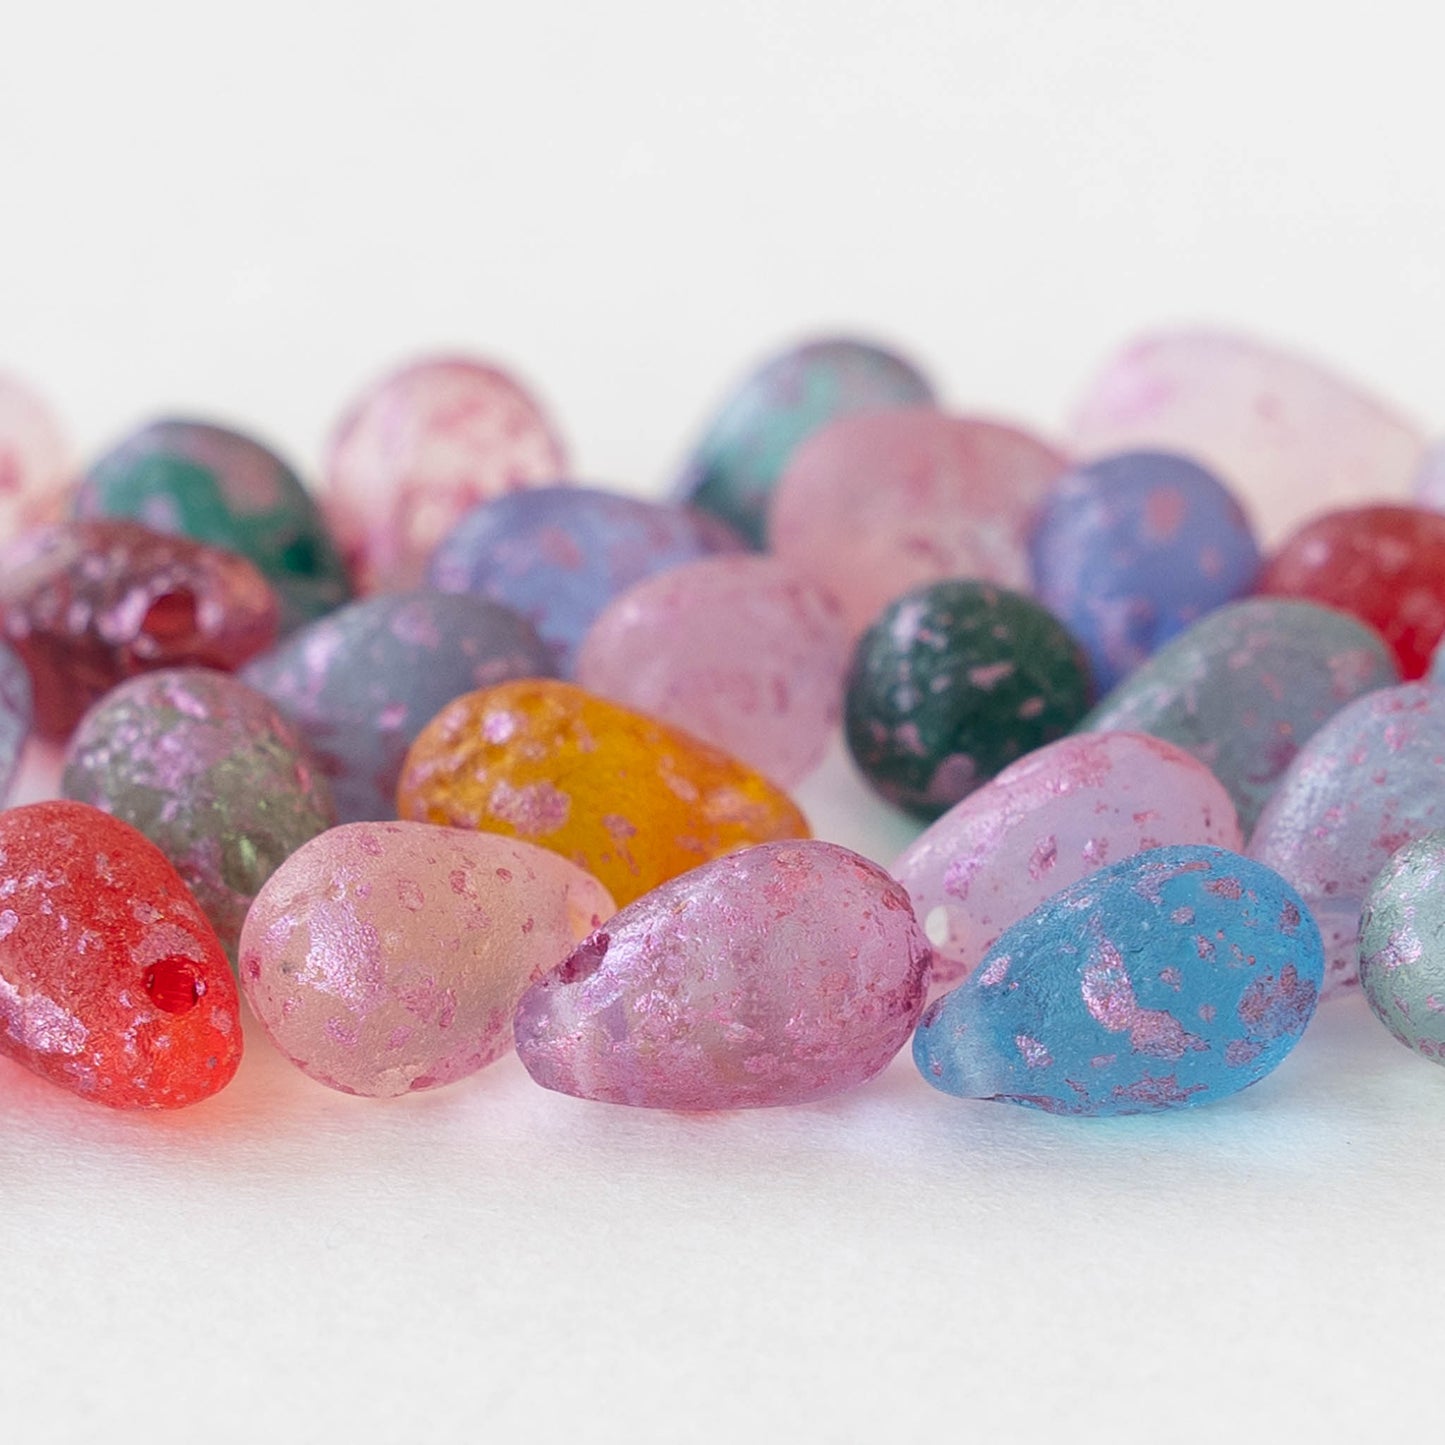 6x9mm Glass Teardrop Beads - Mixed Matte Colors with Pink Dust - 30 Beads